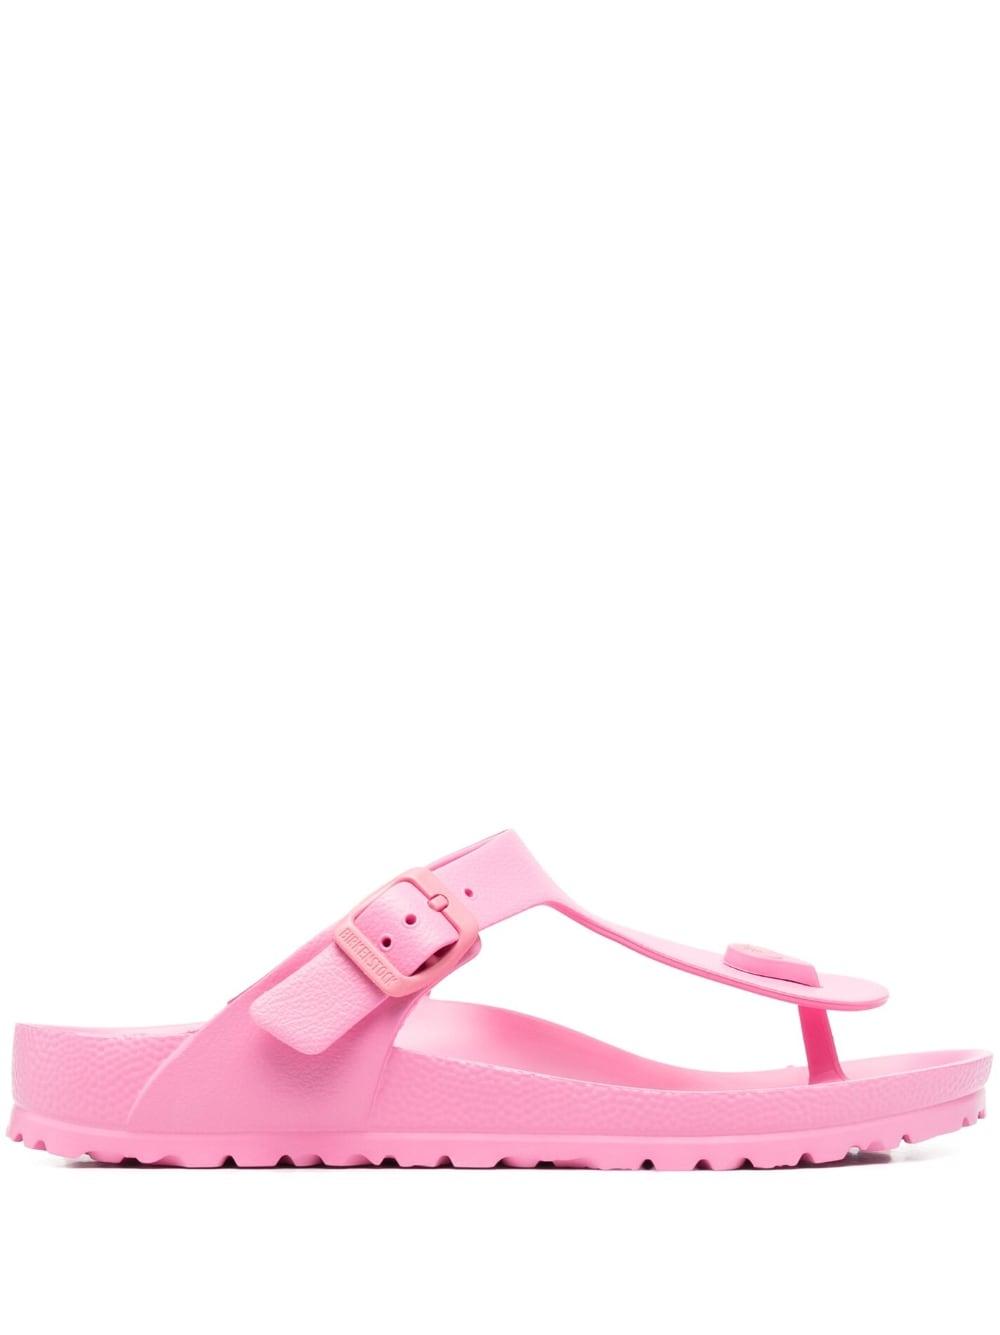 Birkenstock Gizeh Rubber Thong Sandals in Pink | Lyst